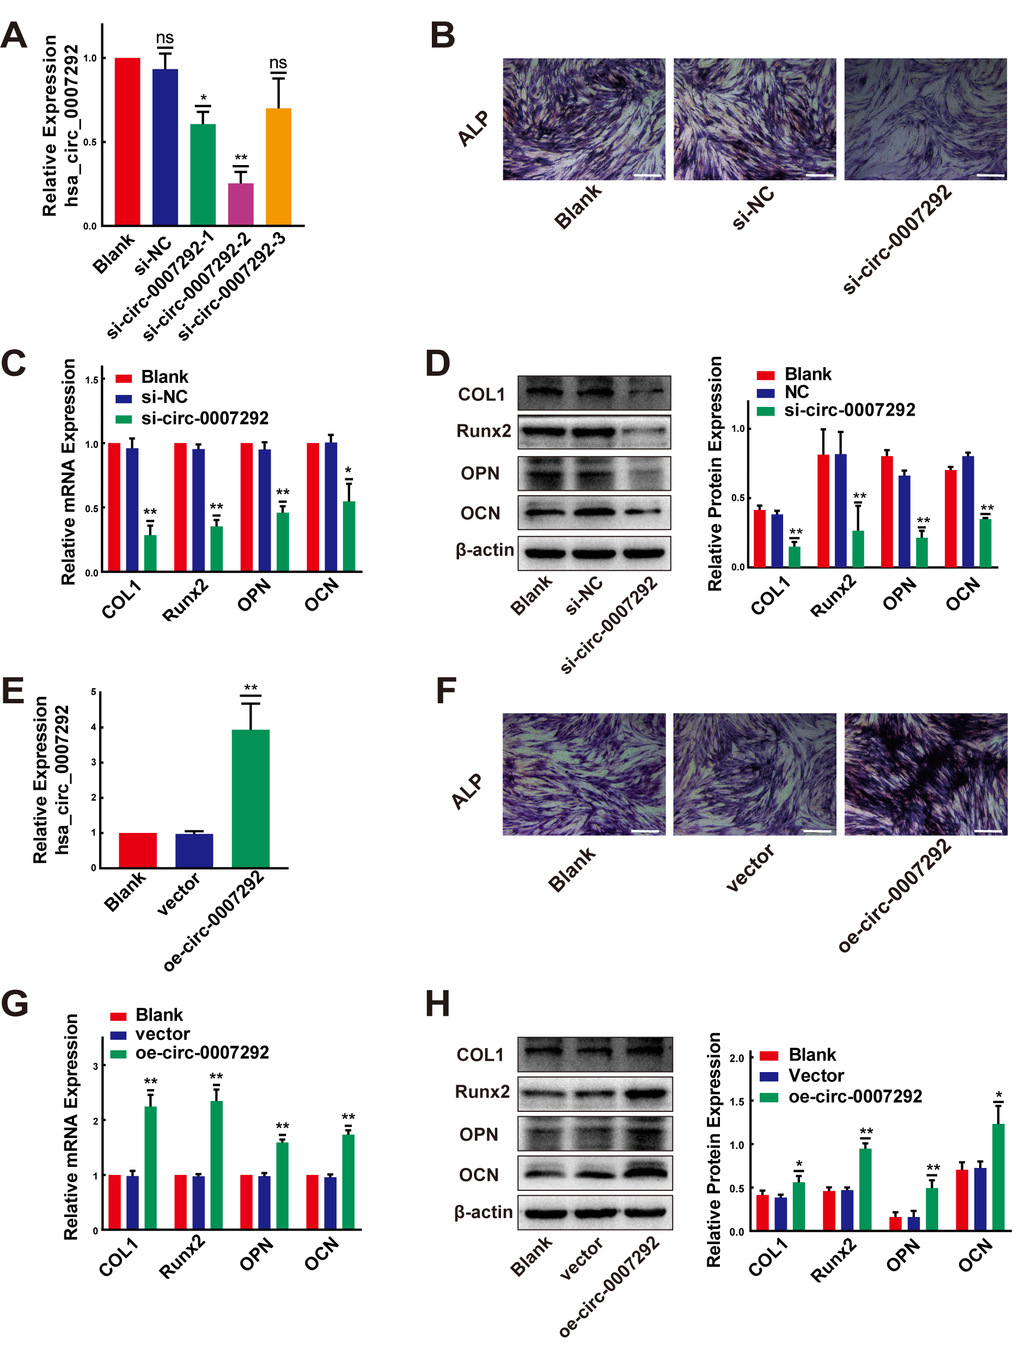 Hsa-circ-0007292 promotes the osteogenic differentiation of PLL cells. (A) qRT-PCR assays detected the transfection efficiency of siRNAs targeting hsa